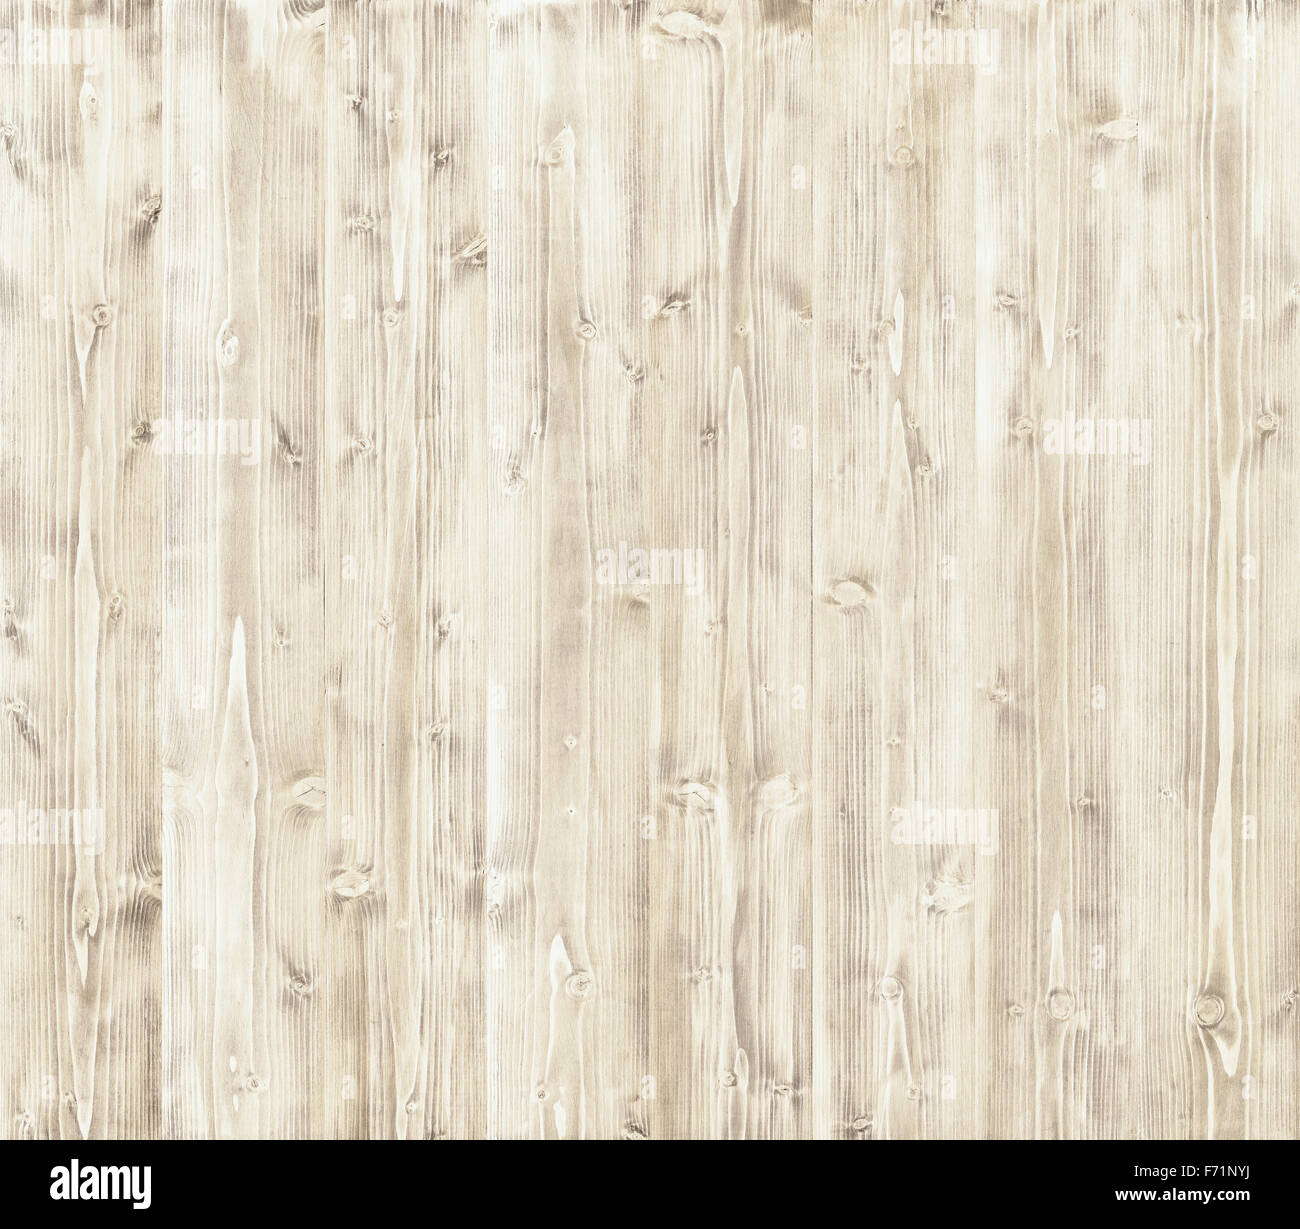 Wooden texture, light wood background Stock Photo - Alamy